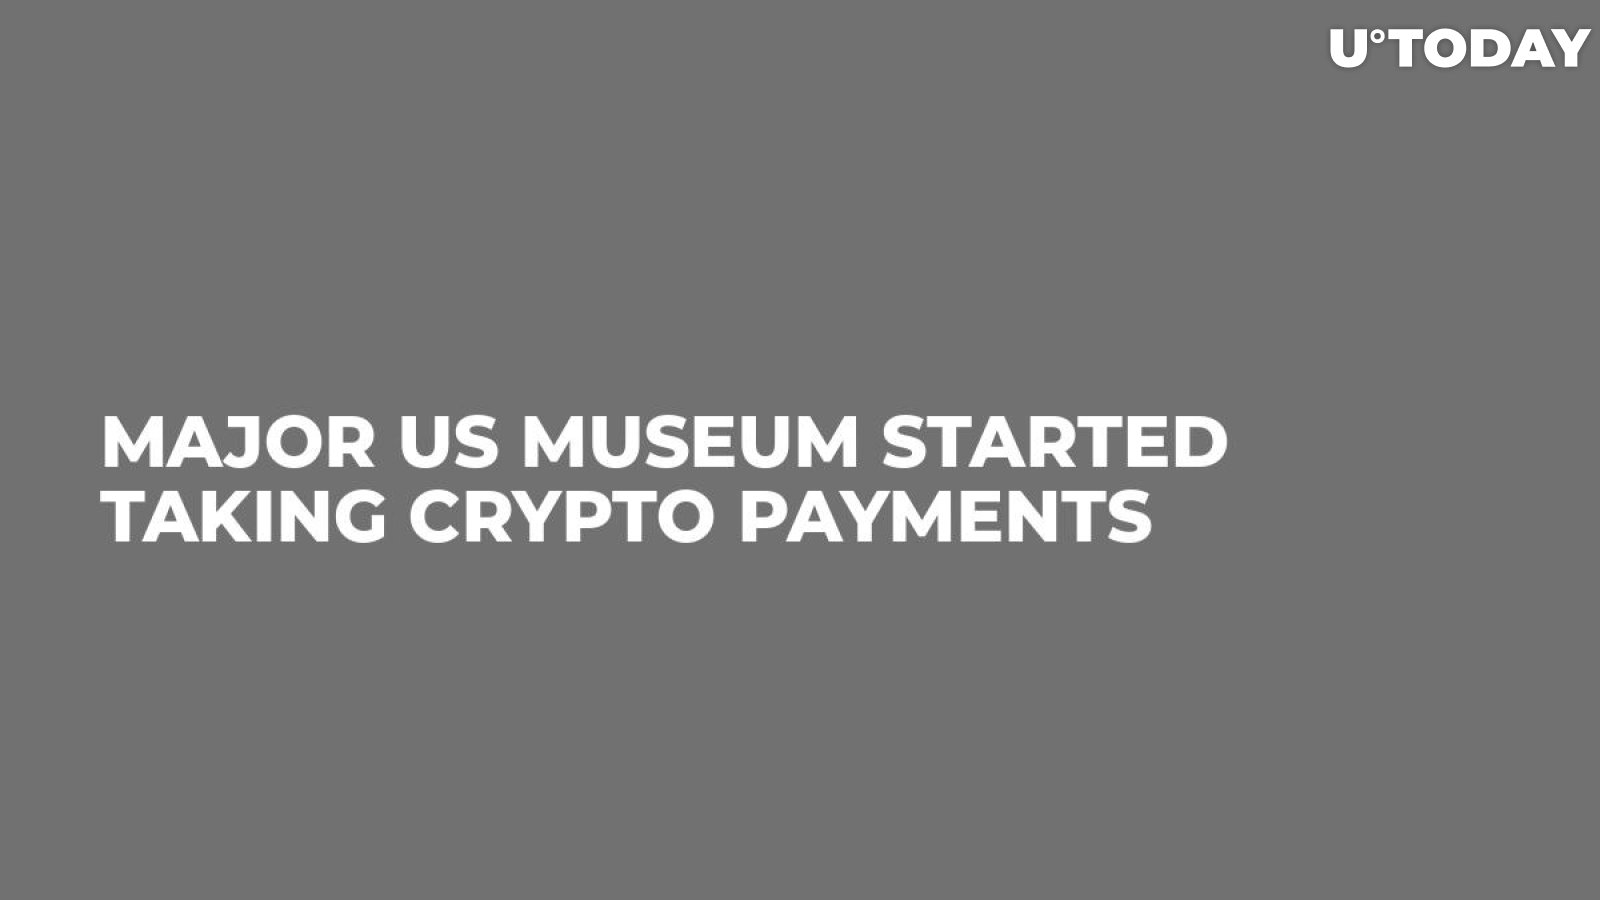 Major US Museum Started Taking Crypto Payments